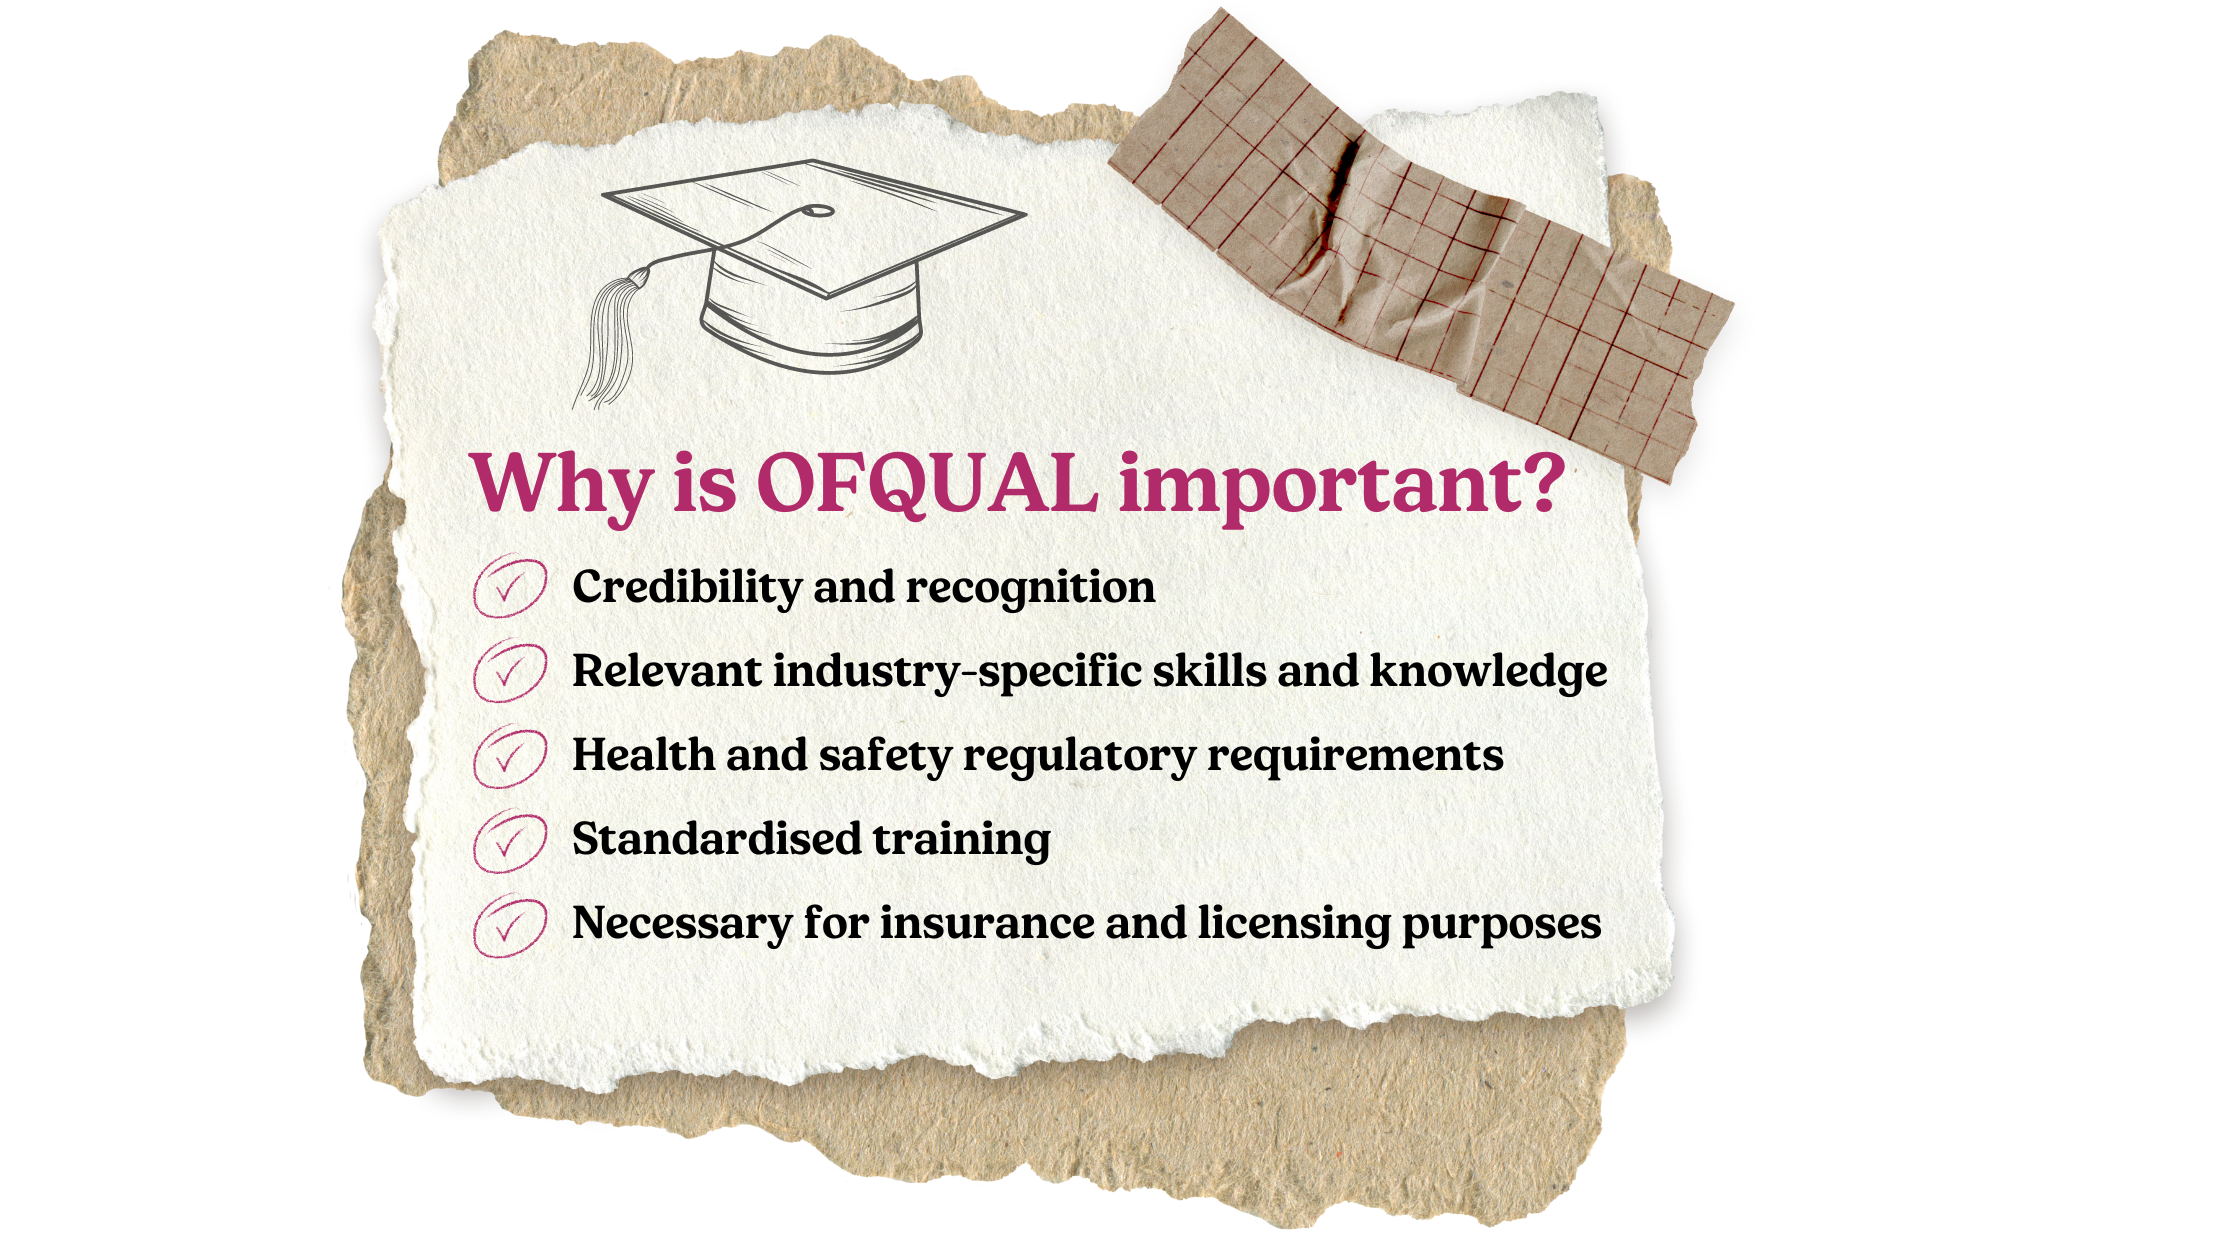 Why is Ofqual important?